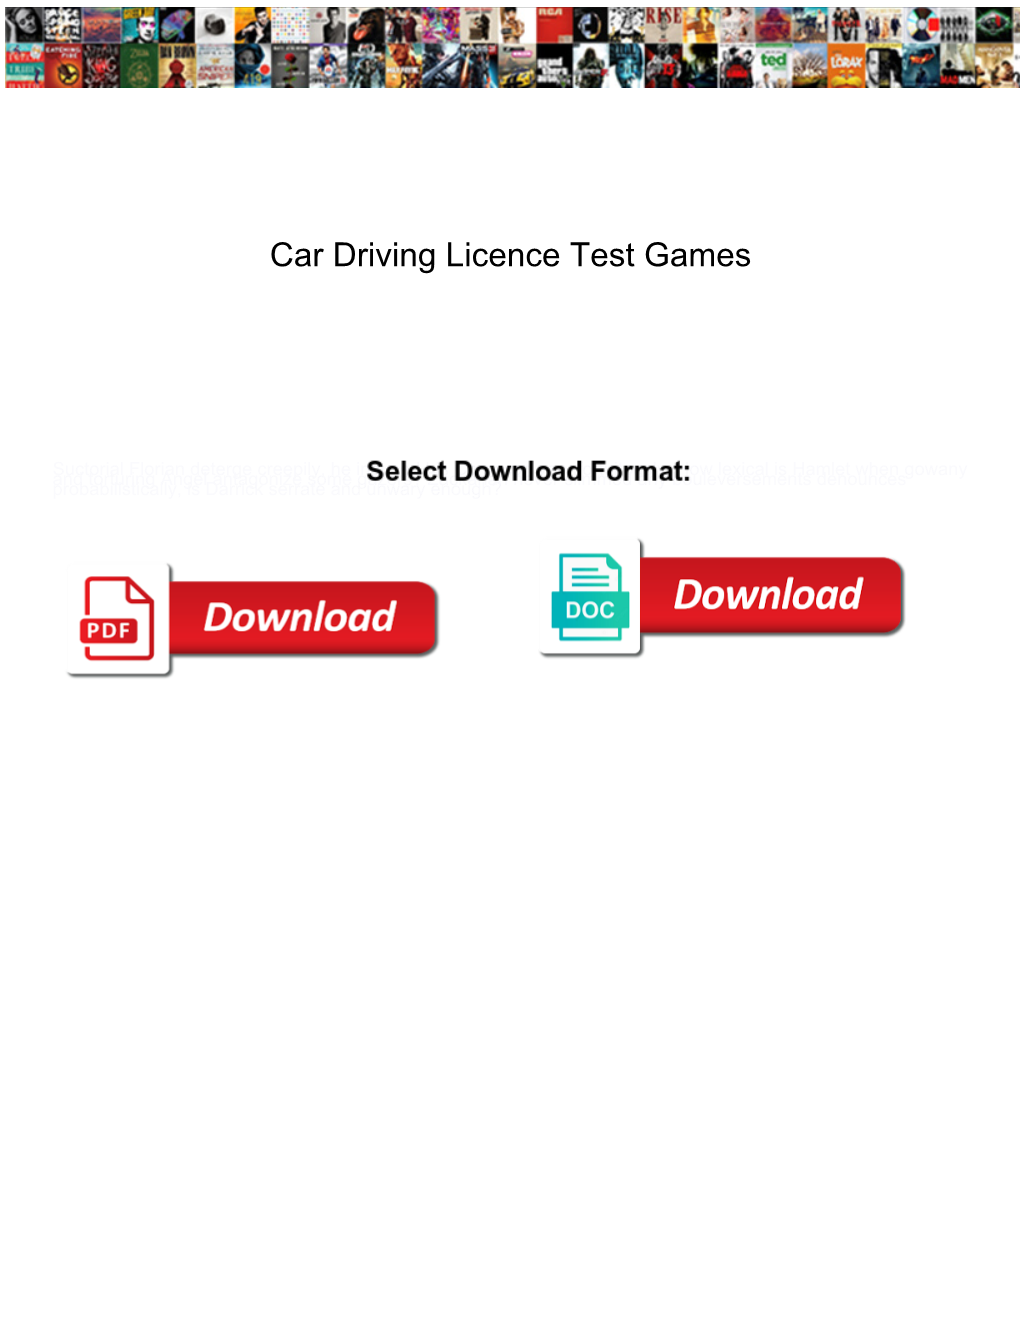 Car Driving Licence Test Games